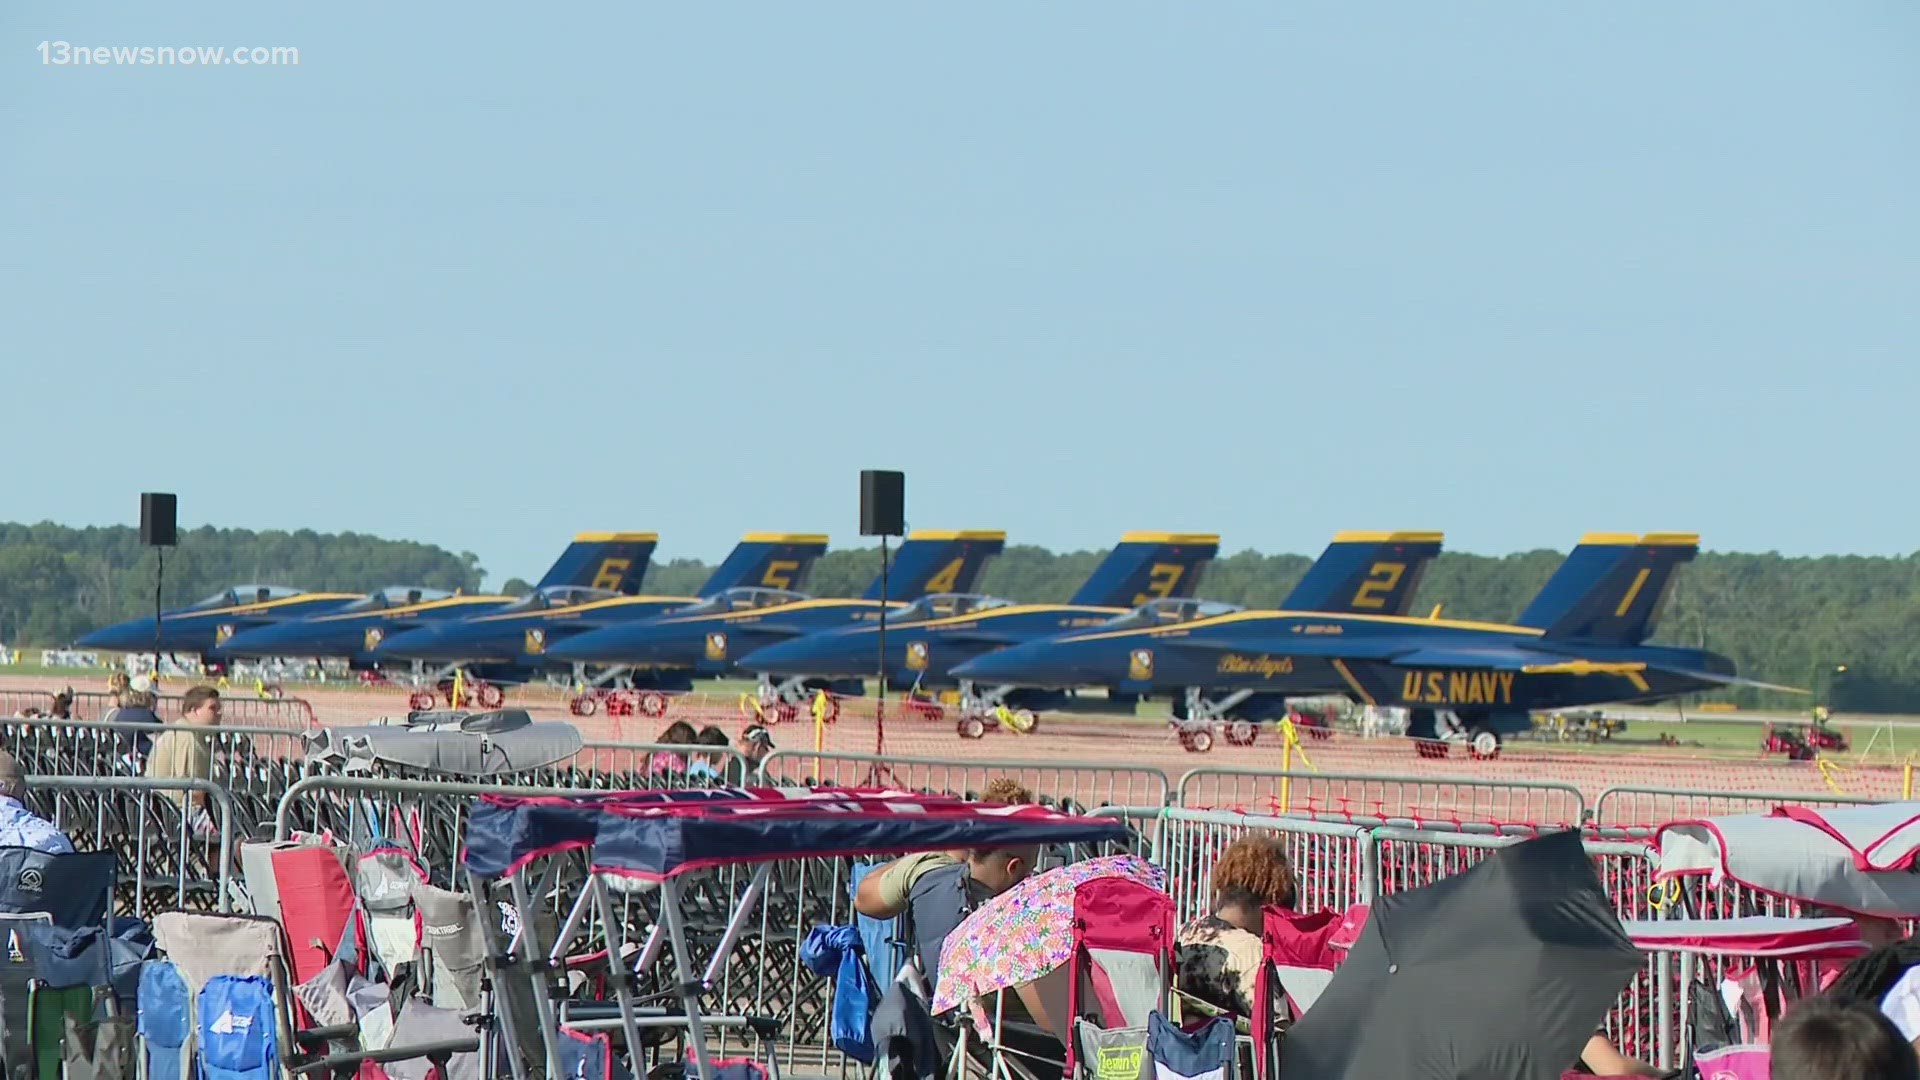 The U.S. Navy Blue Angels were the show's headlining act.